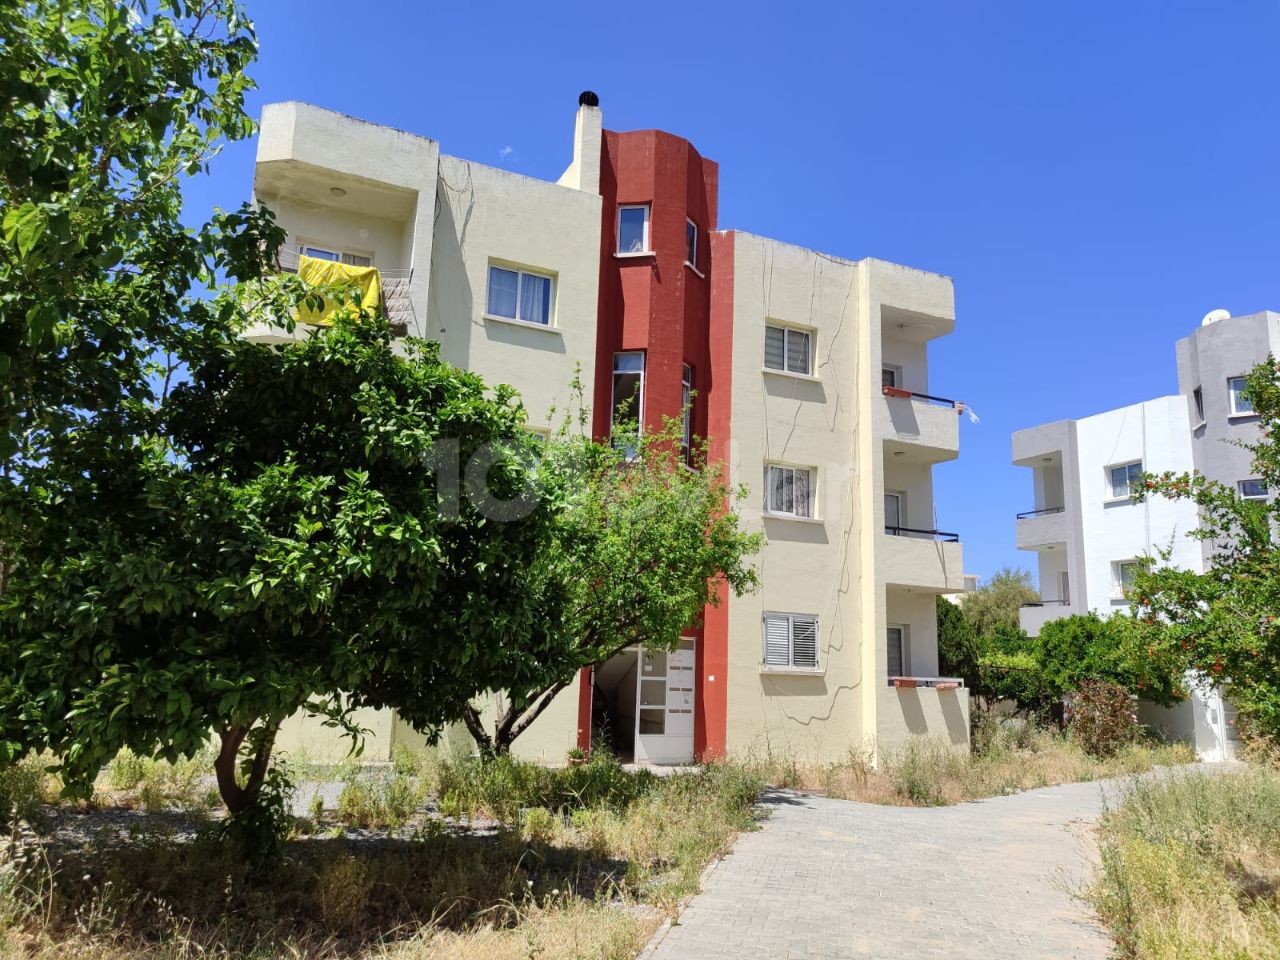 Behind Girne Pia Bella Hotel, 3+1, Investment Opportunity Flat.